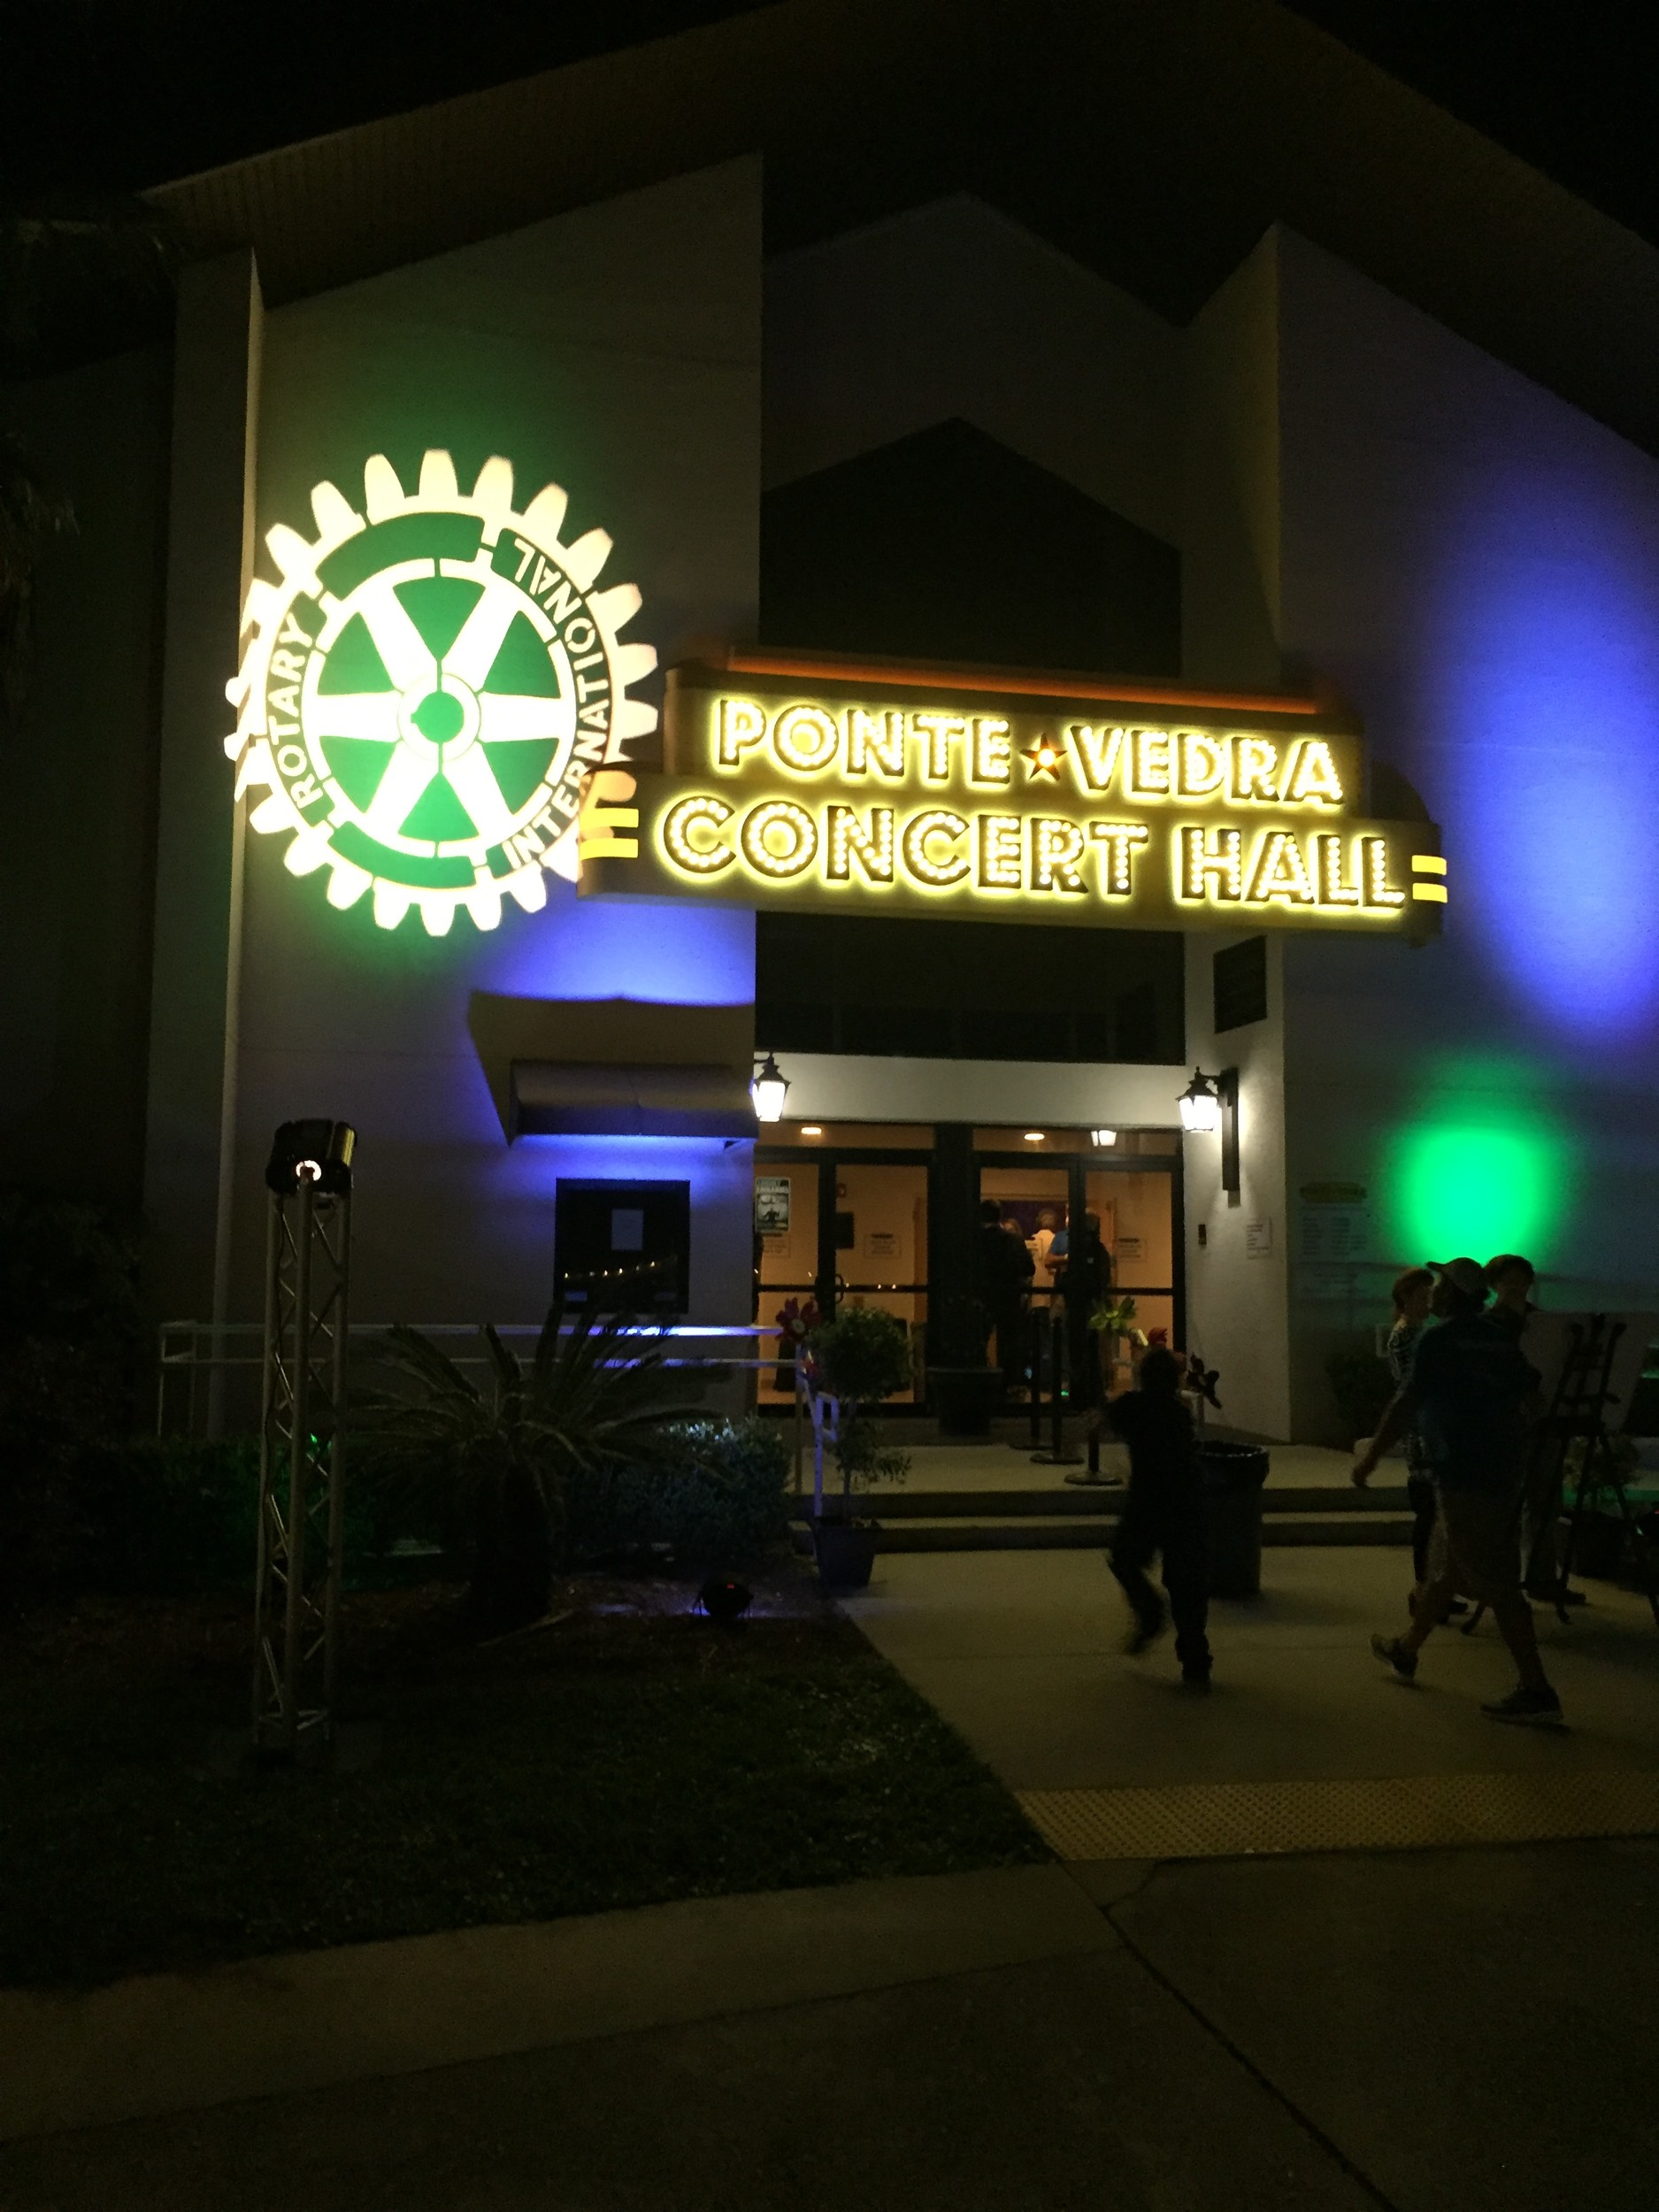 Rotary logo on the Ponte Vedra Concert Hall.